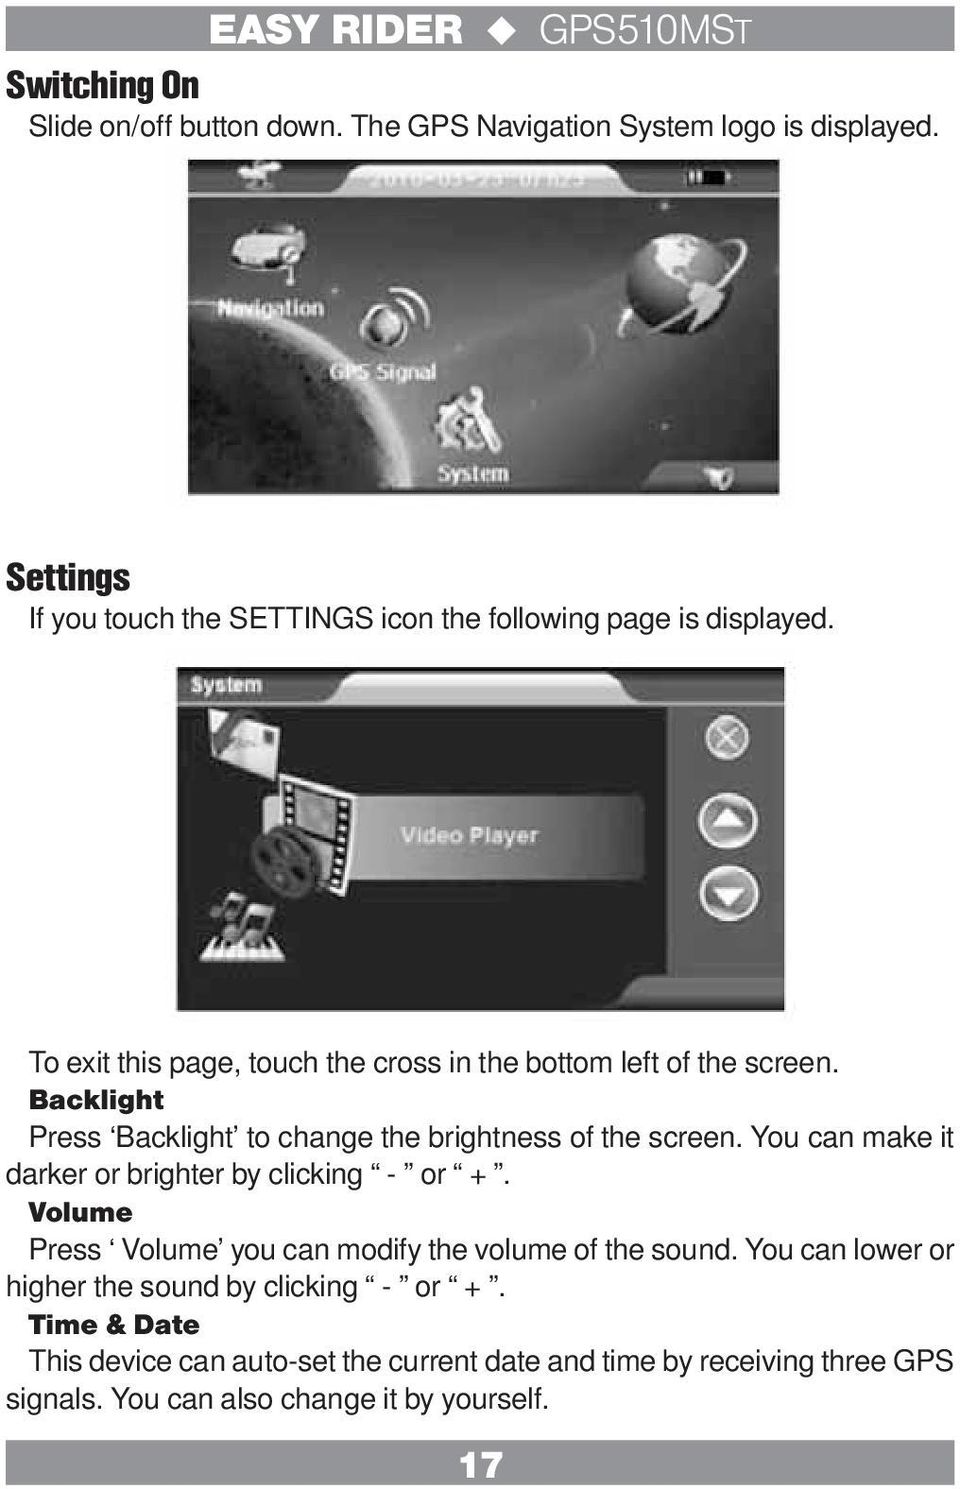 Backlight Press Backlight to change the brightness of the screen. You can make it darker or brighter by clicking - or +.